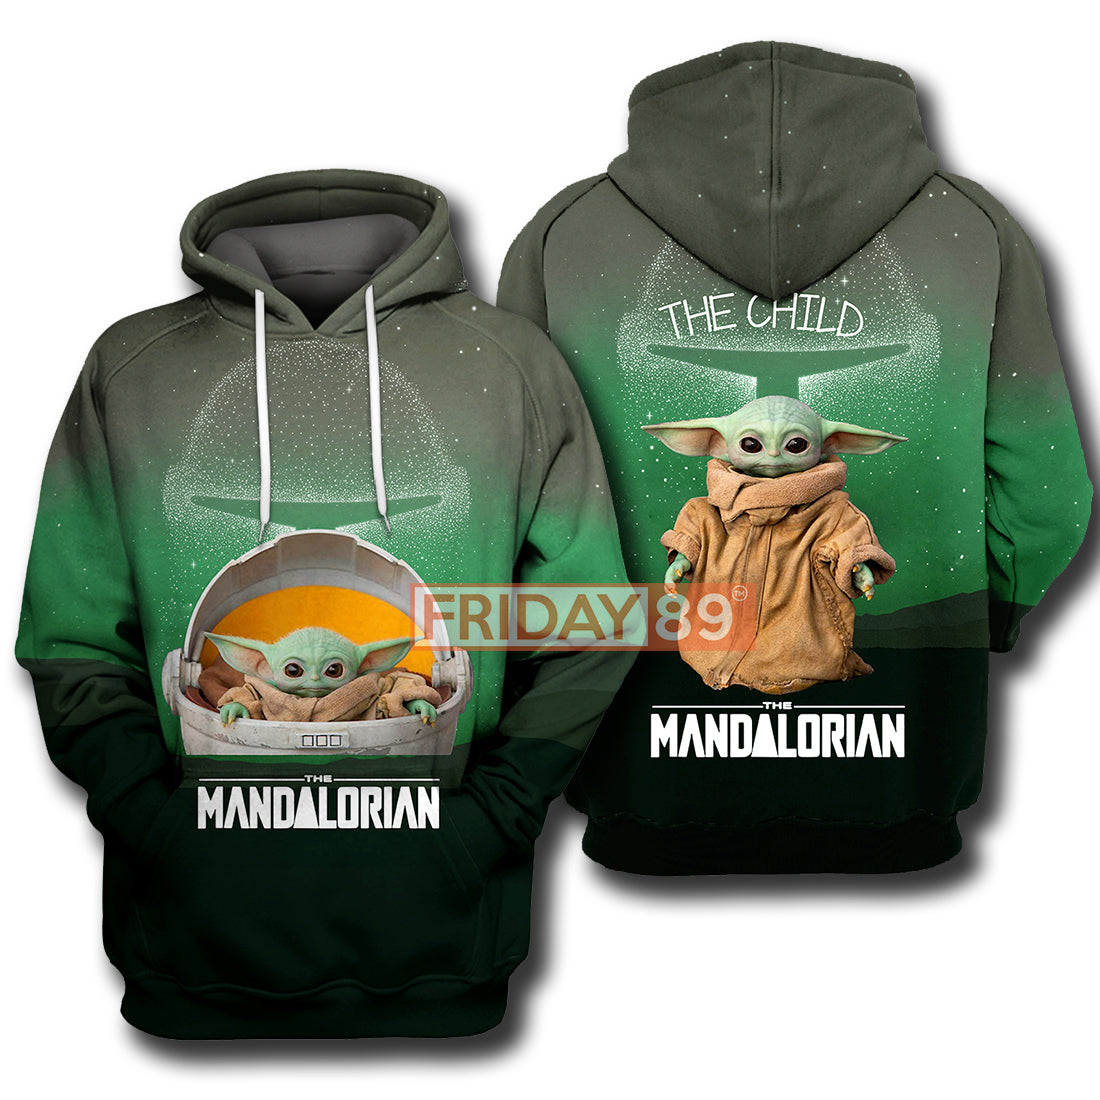 Unifinz SW T-shirt The Child The Mandalorian Baby Yoda All Over Print T-shirt SW Hoodie Sweater Tank 2022